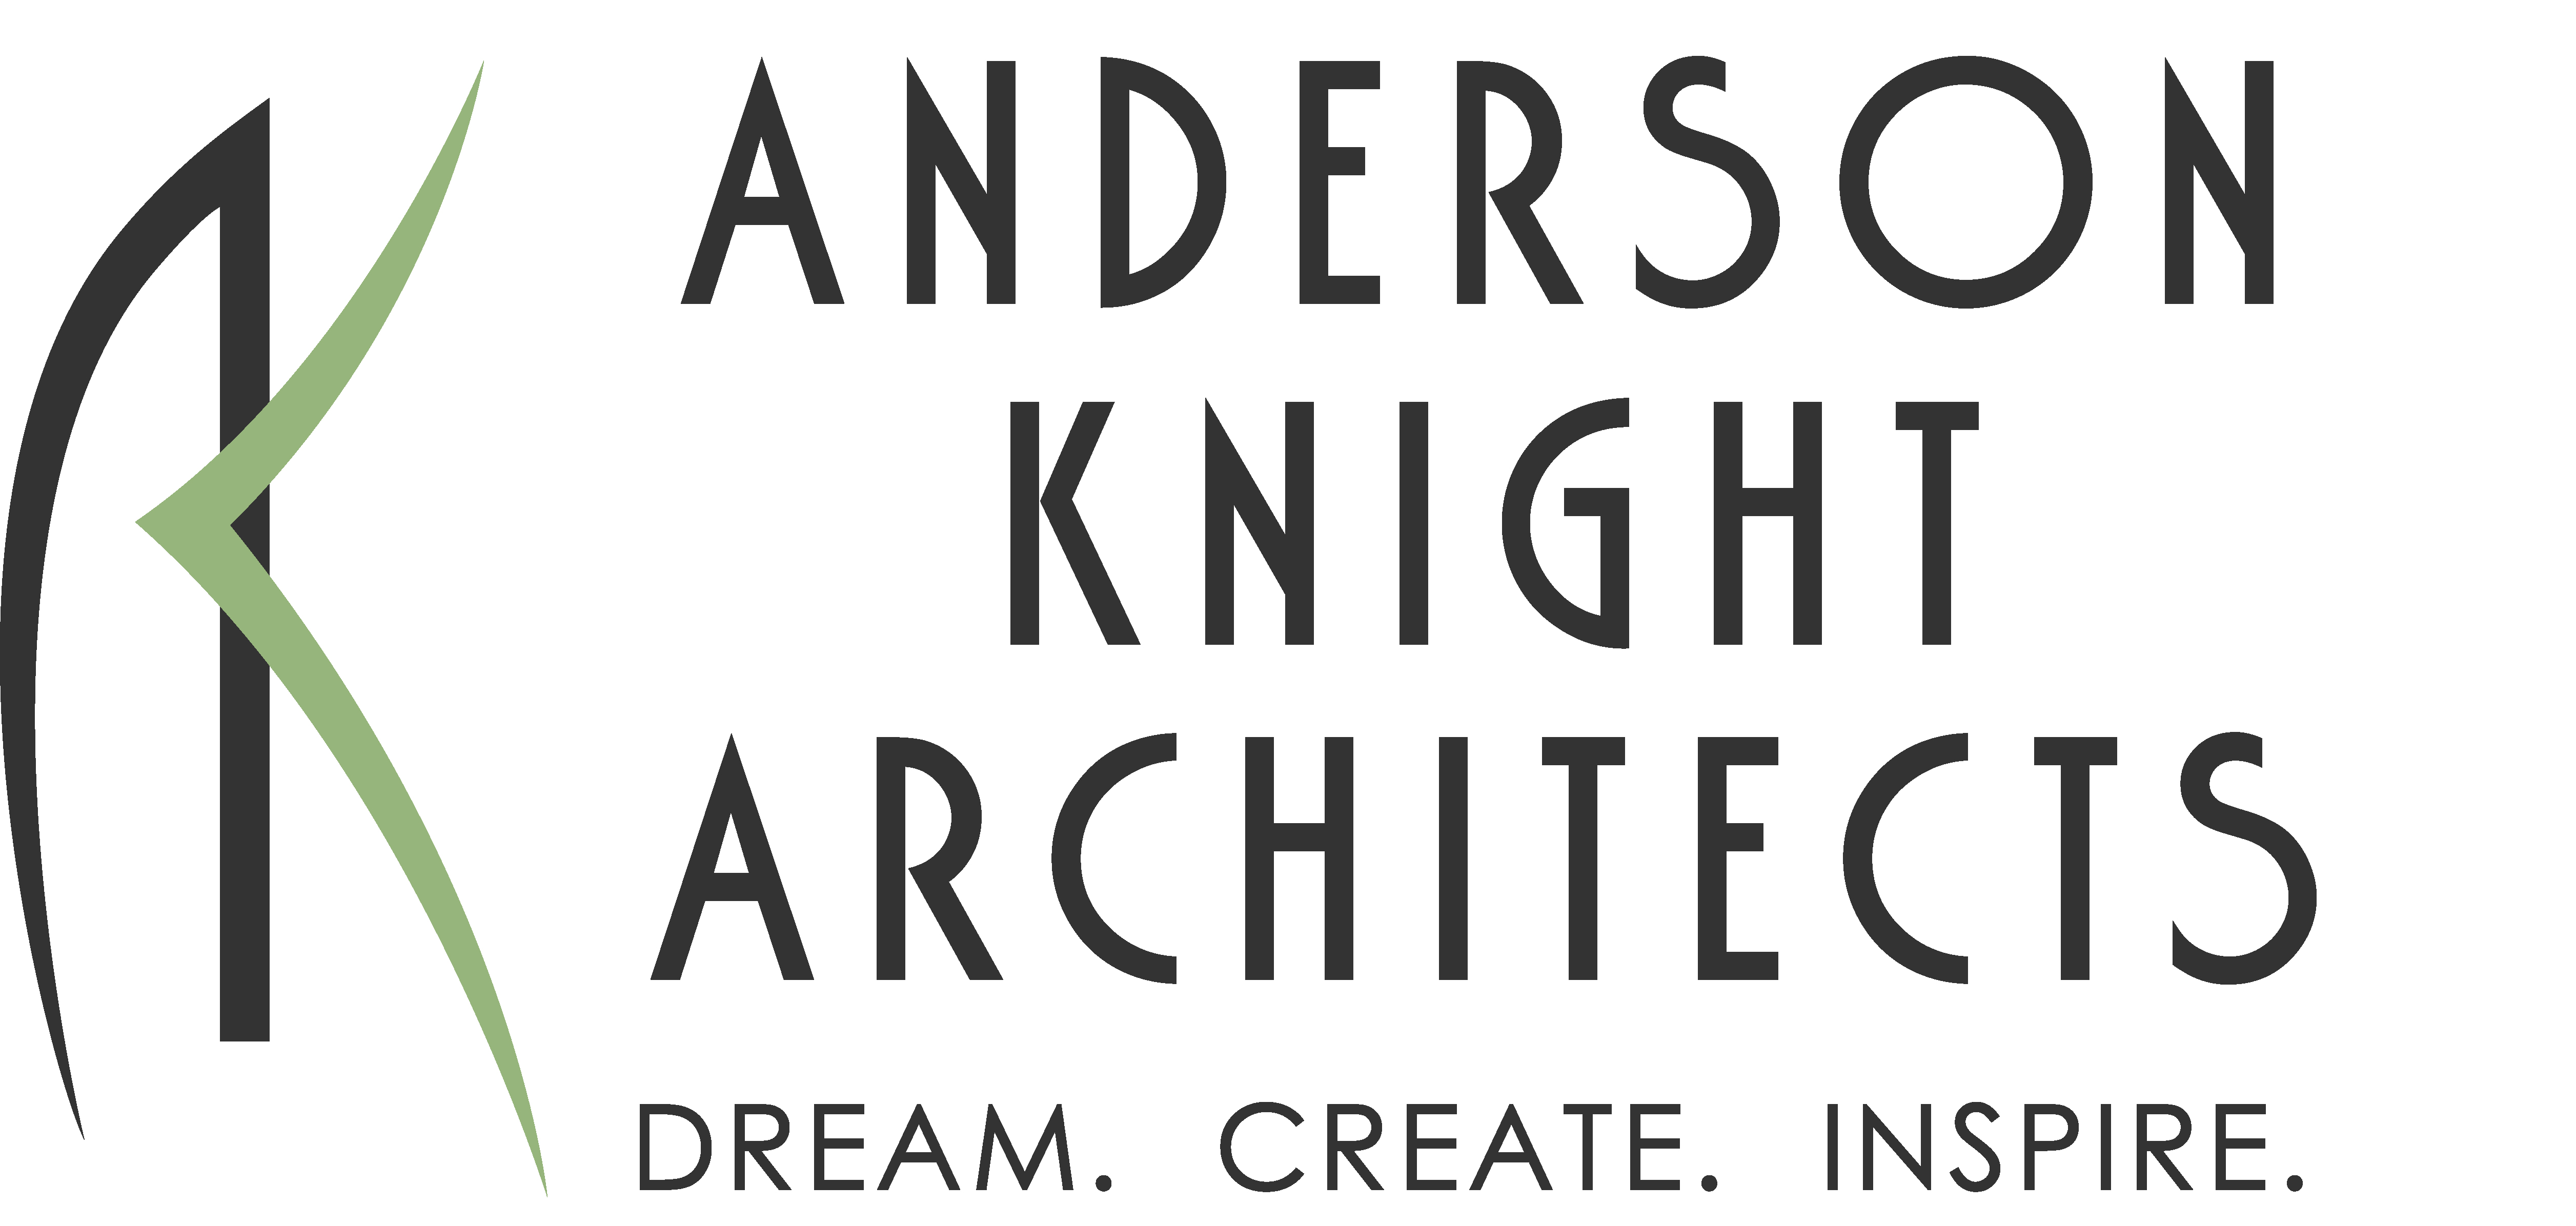 Anderson Knights Architects